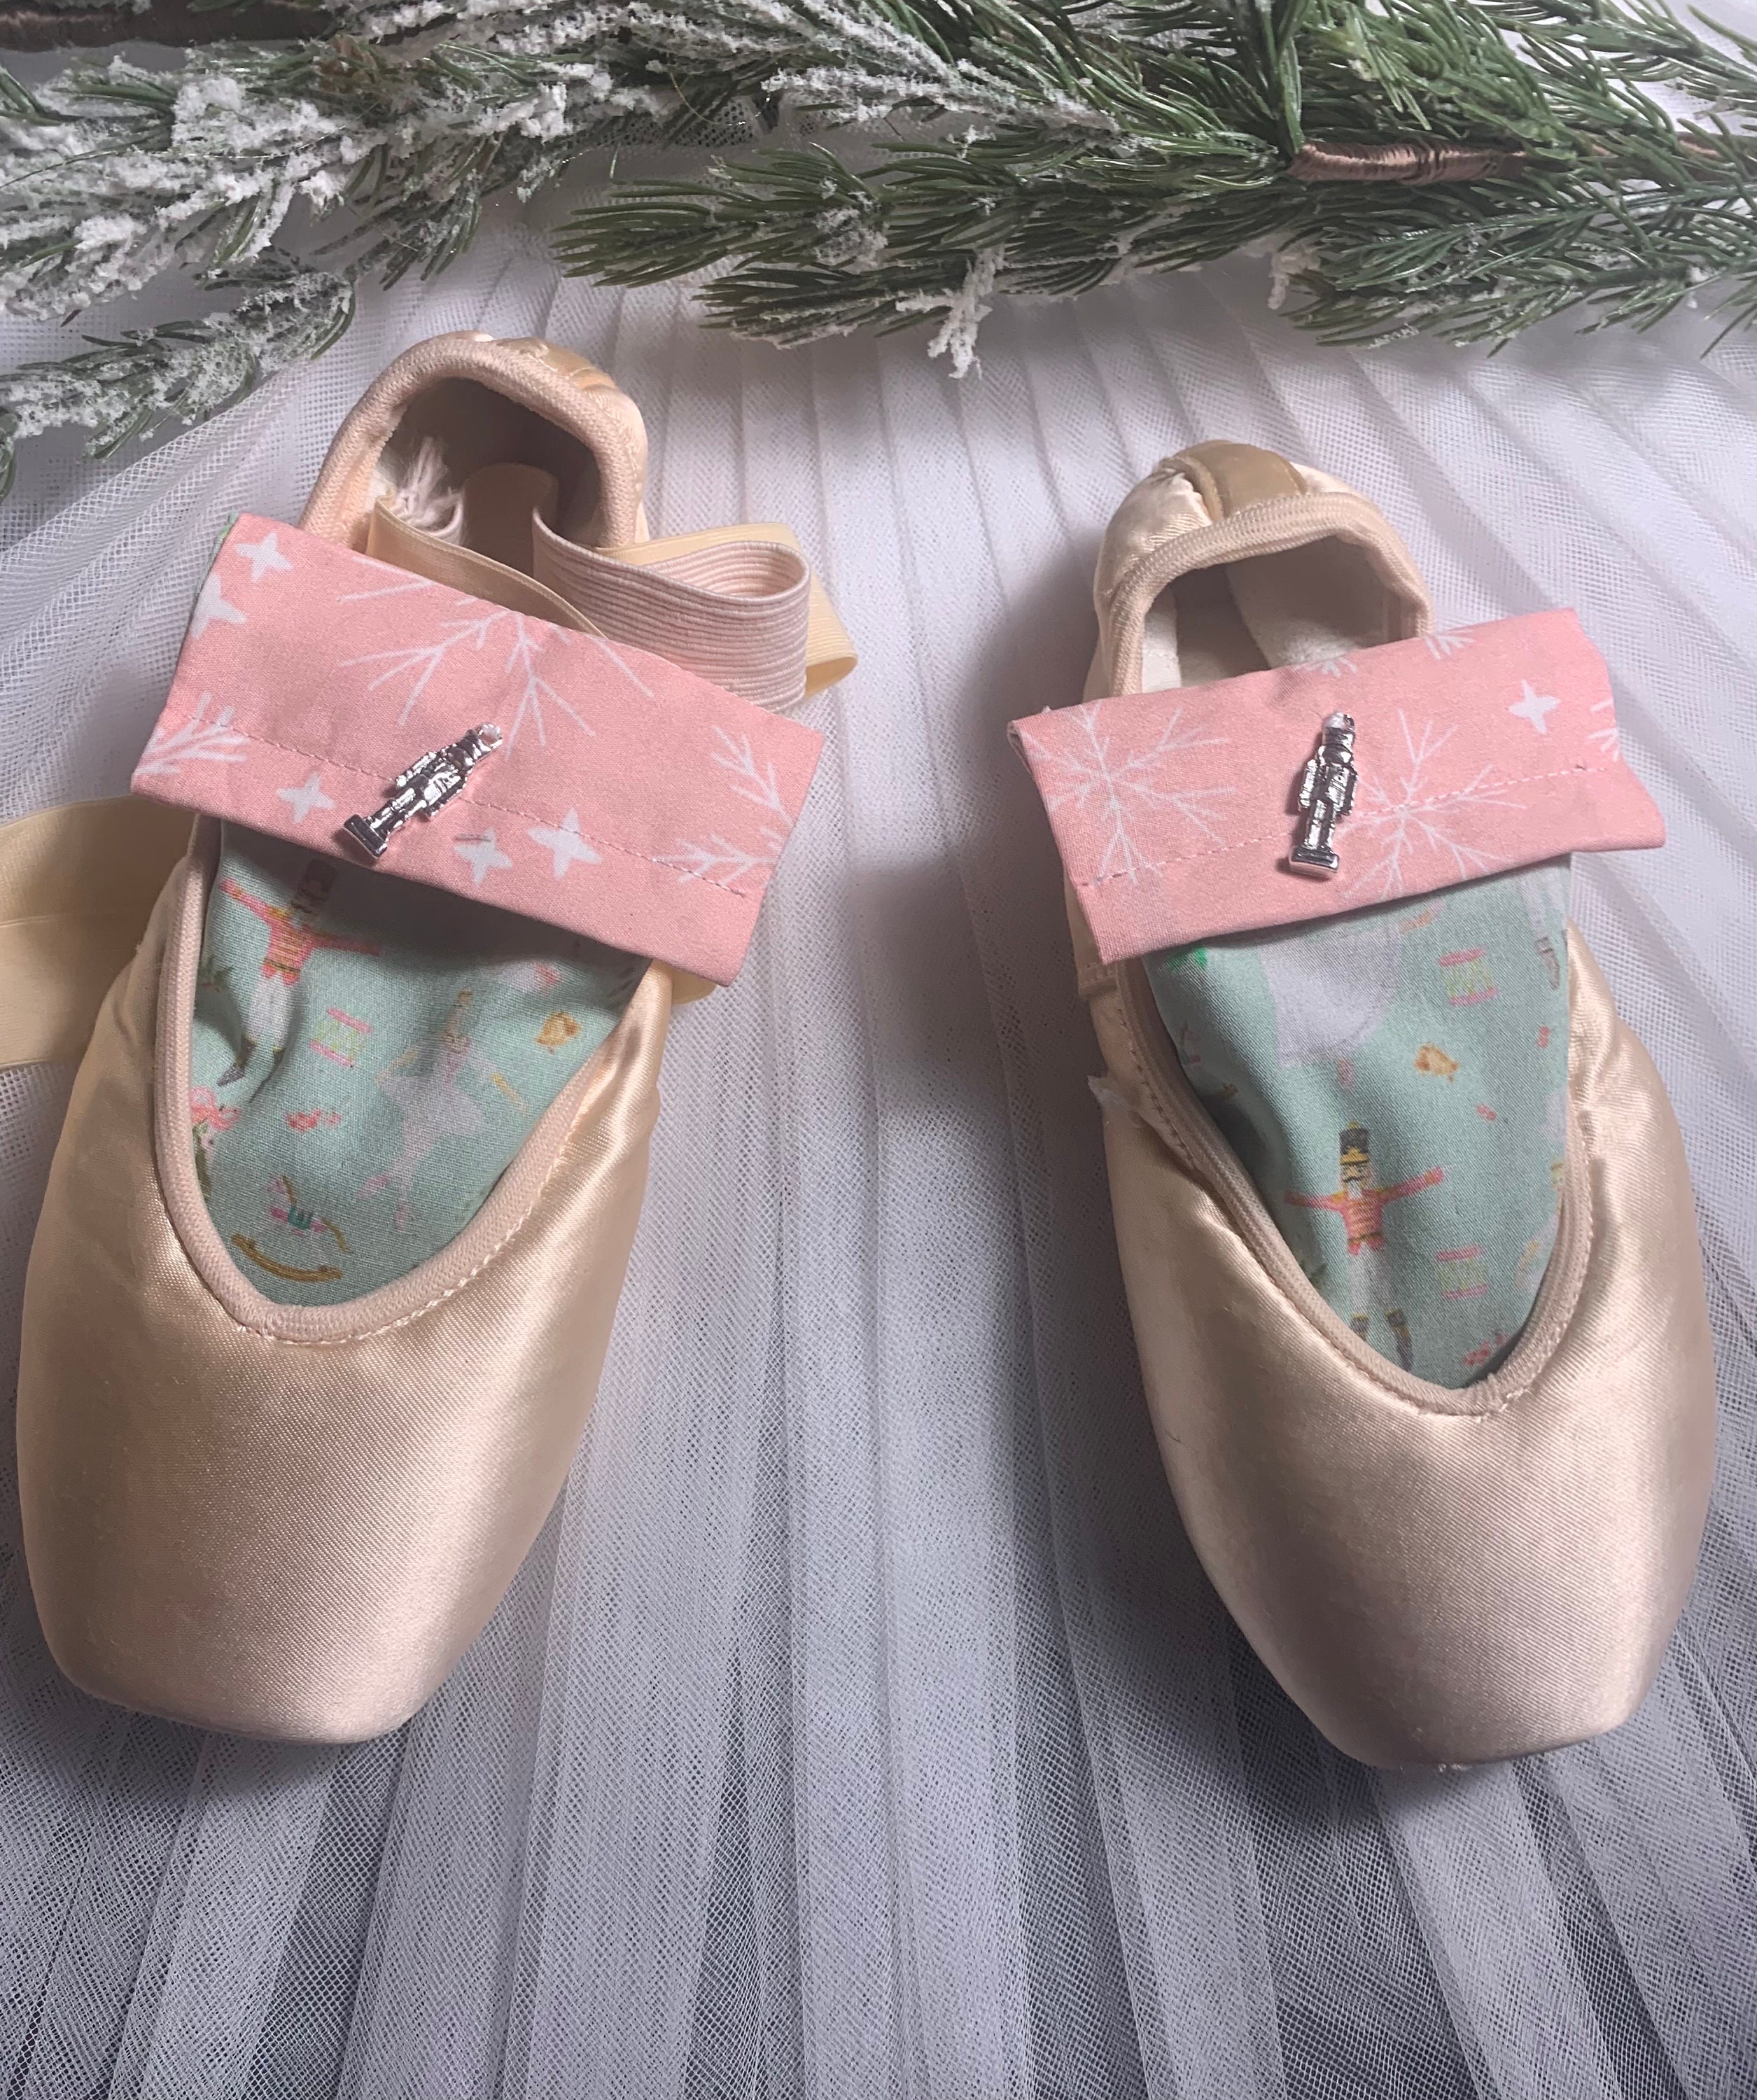 Sewing Kit for Ballet Pointe Shoes, With Ribbons, Elastics